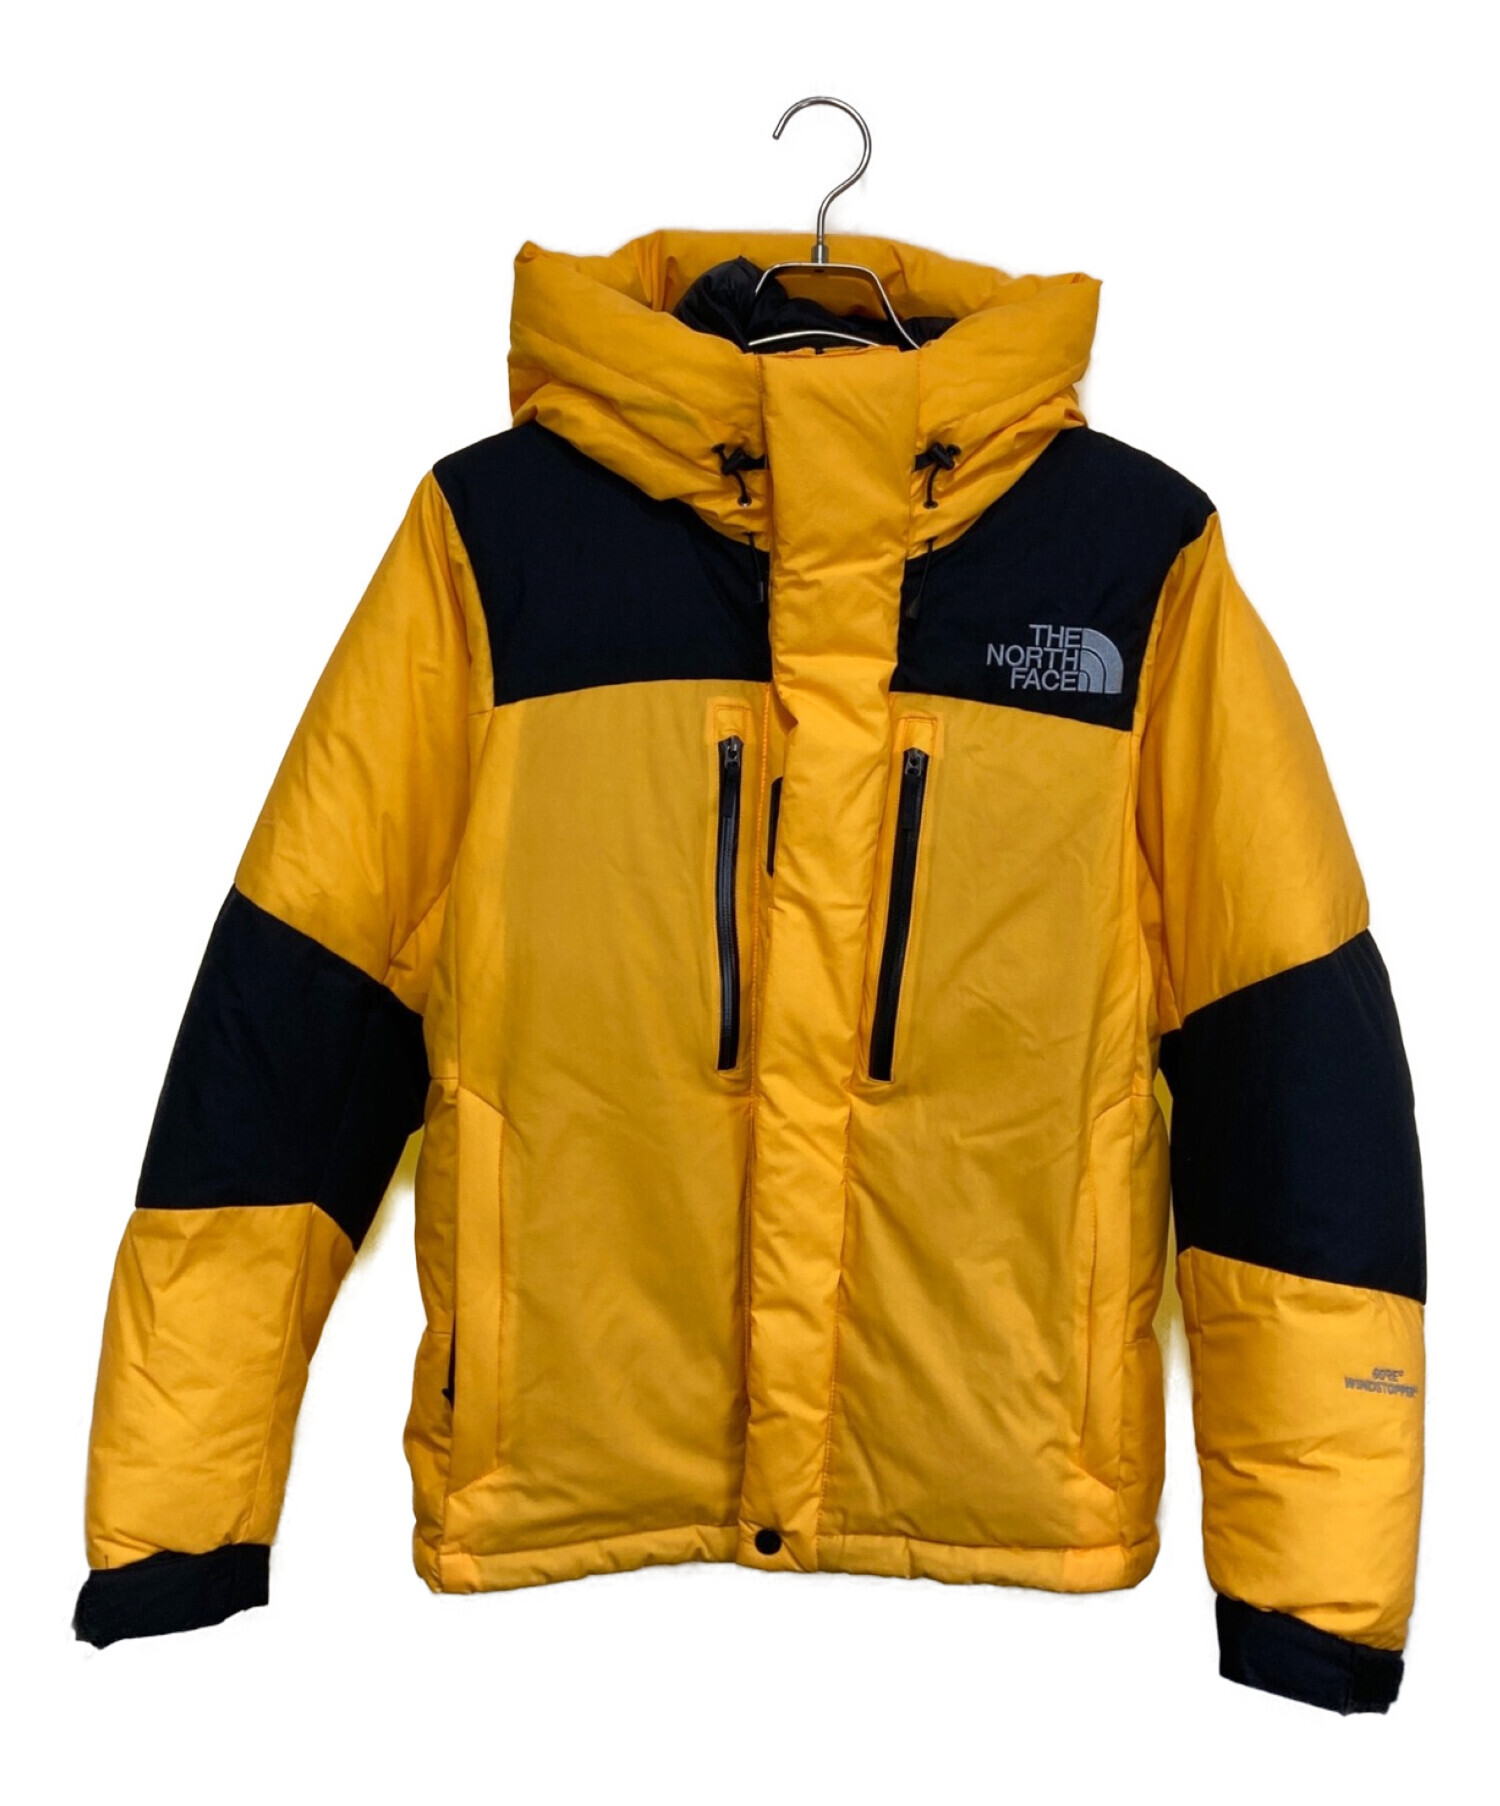 THE NORTH FACE バルトロライトジャケット ND91710 M